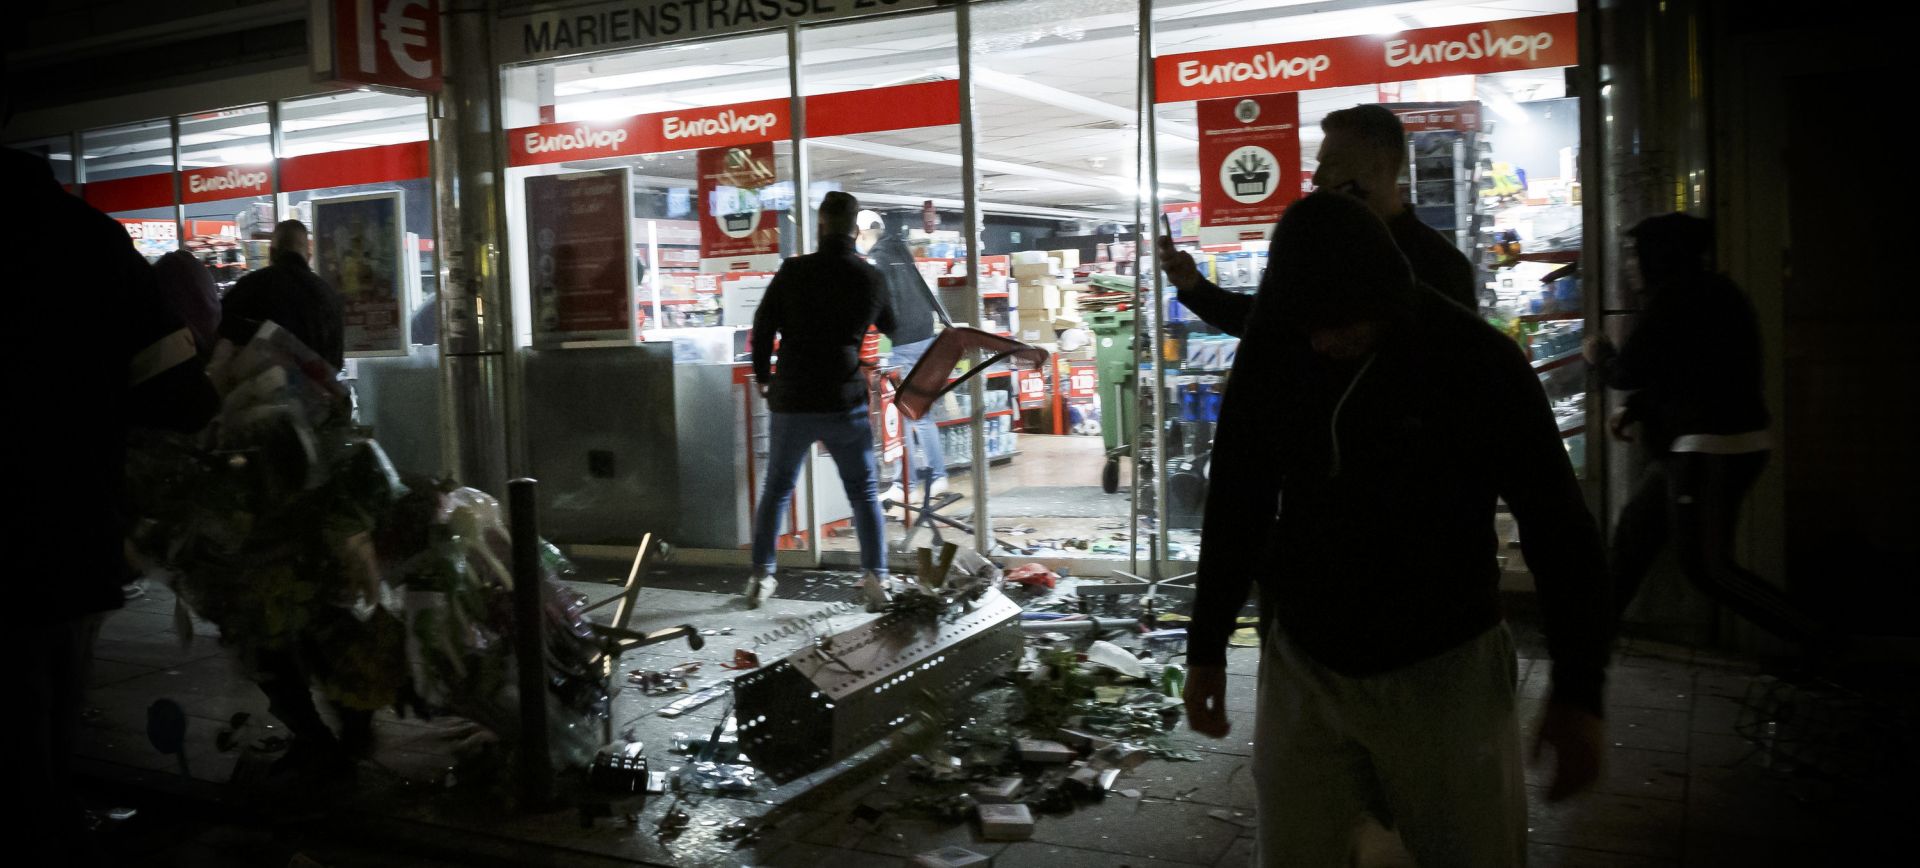 dpatop - 21 June 2020, Baden-Wuerttemberg, Stuttgart: People stand in front of a looted shop in Marien street after several people rioted in downtown Stuttgart during night. Photo: Julian Rettig/dpa